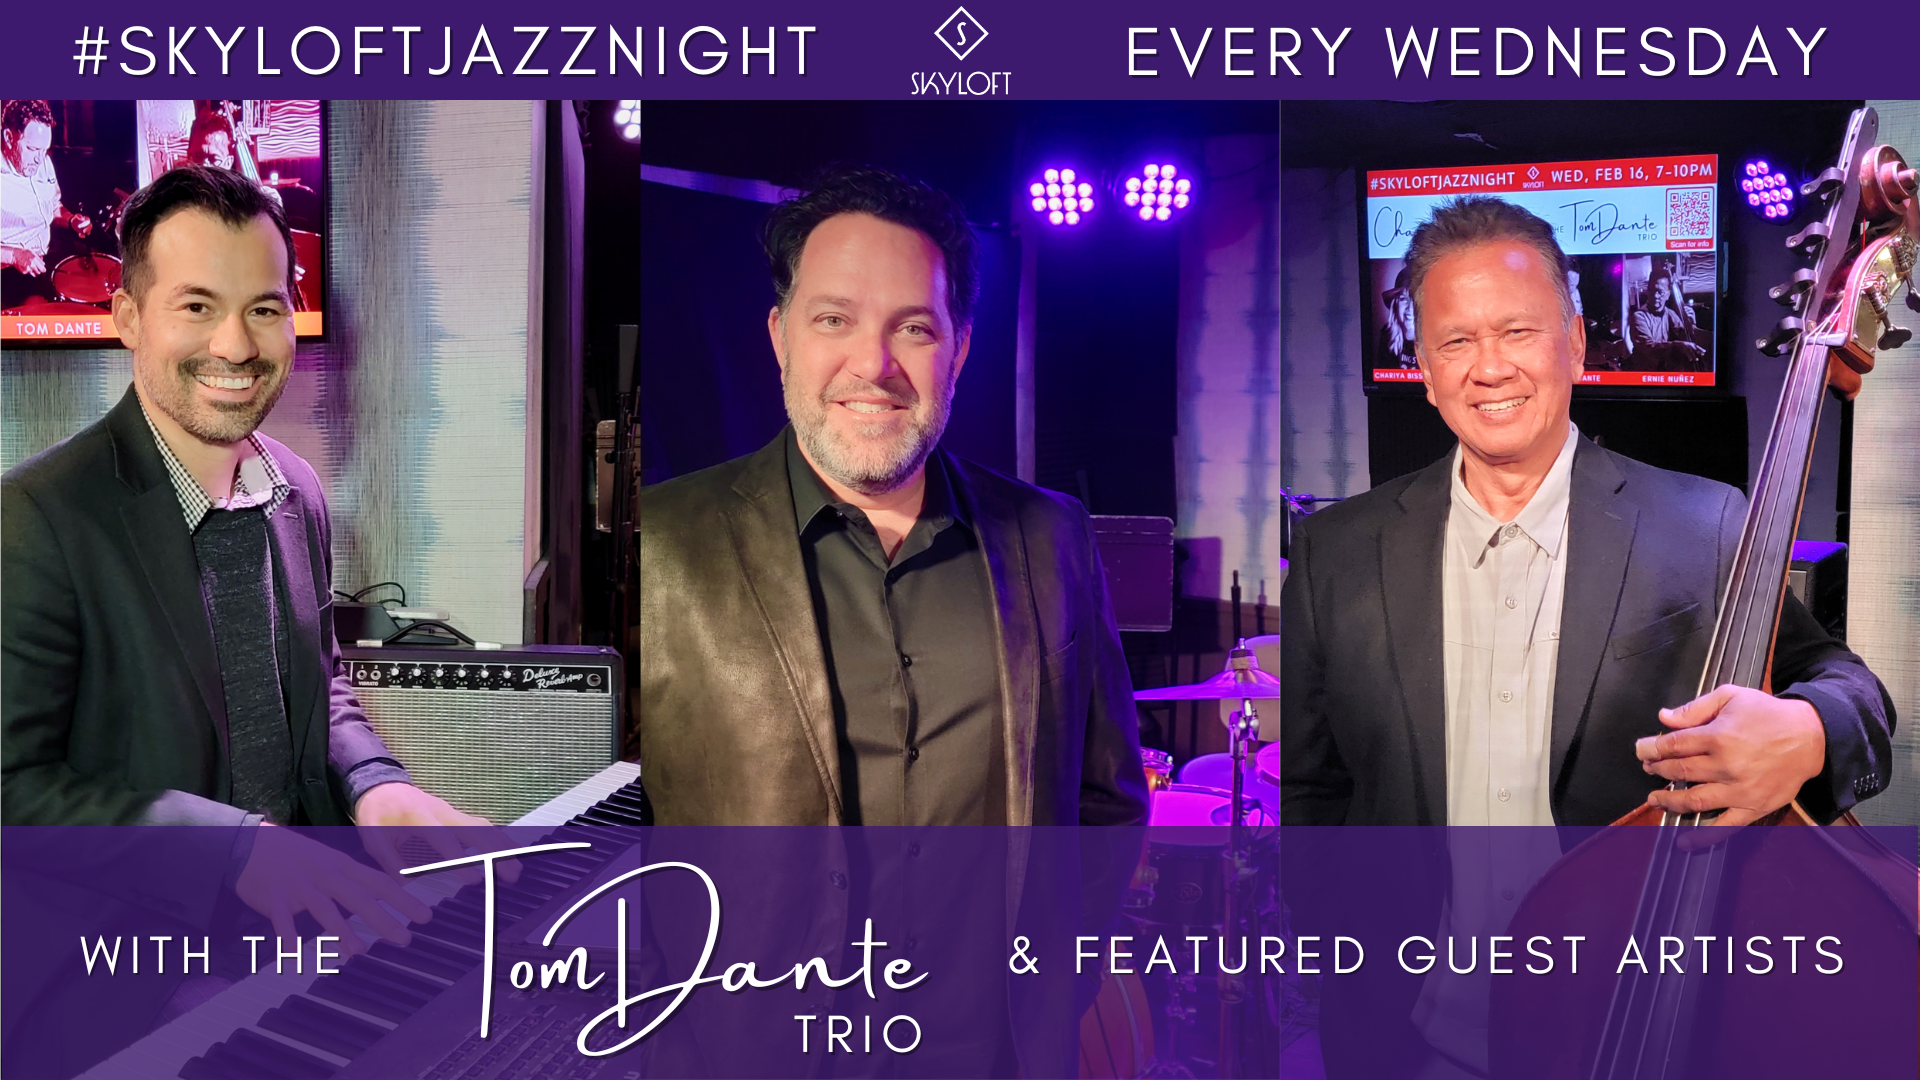 The Tom Dante Trio, at Skyloft in Laguna Beach every Wednesday evening from 7 to 10 pm.